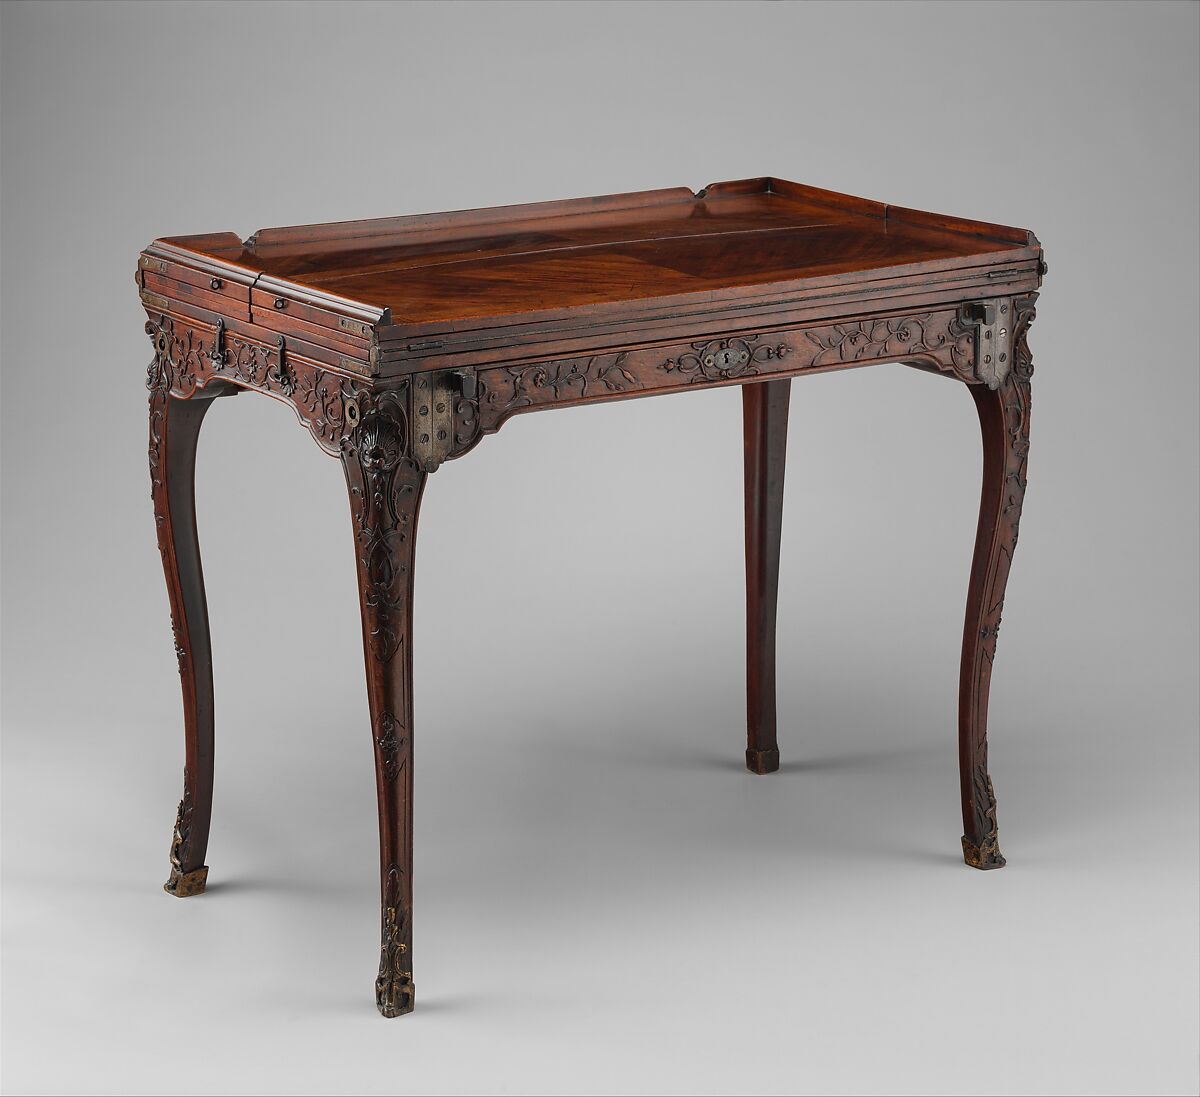 Traveling table (table de voyage or table pliante), Carved walnut; gilt-bronze mounts; steel hinges; linings of felt and leather, French